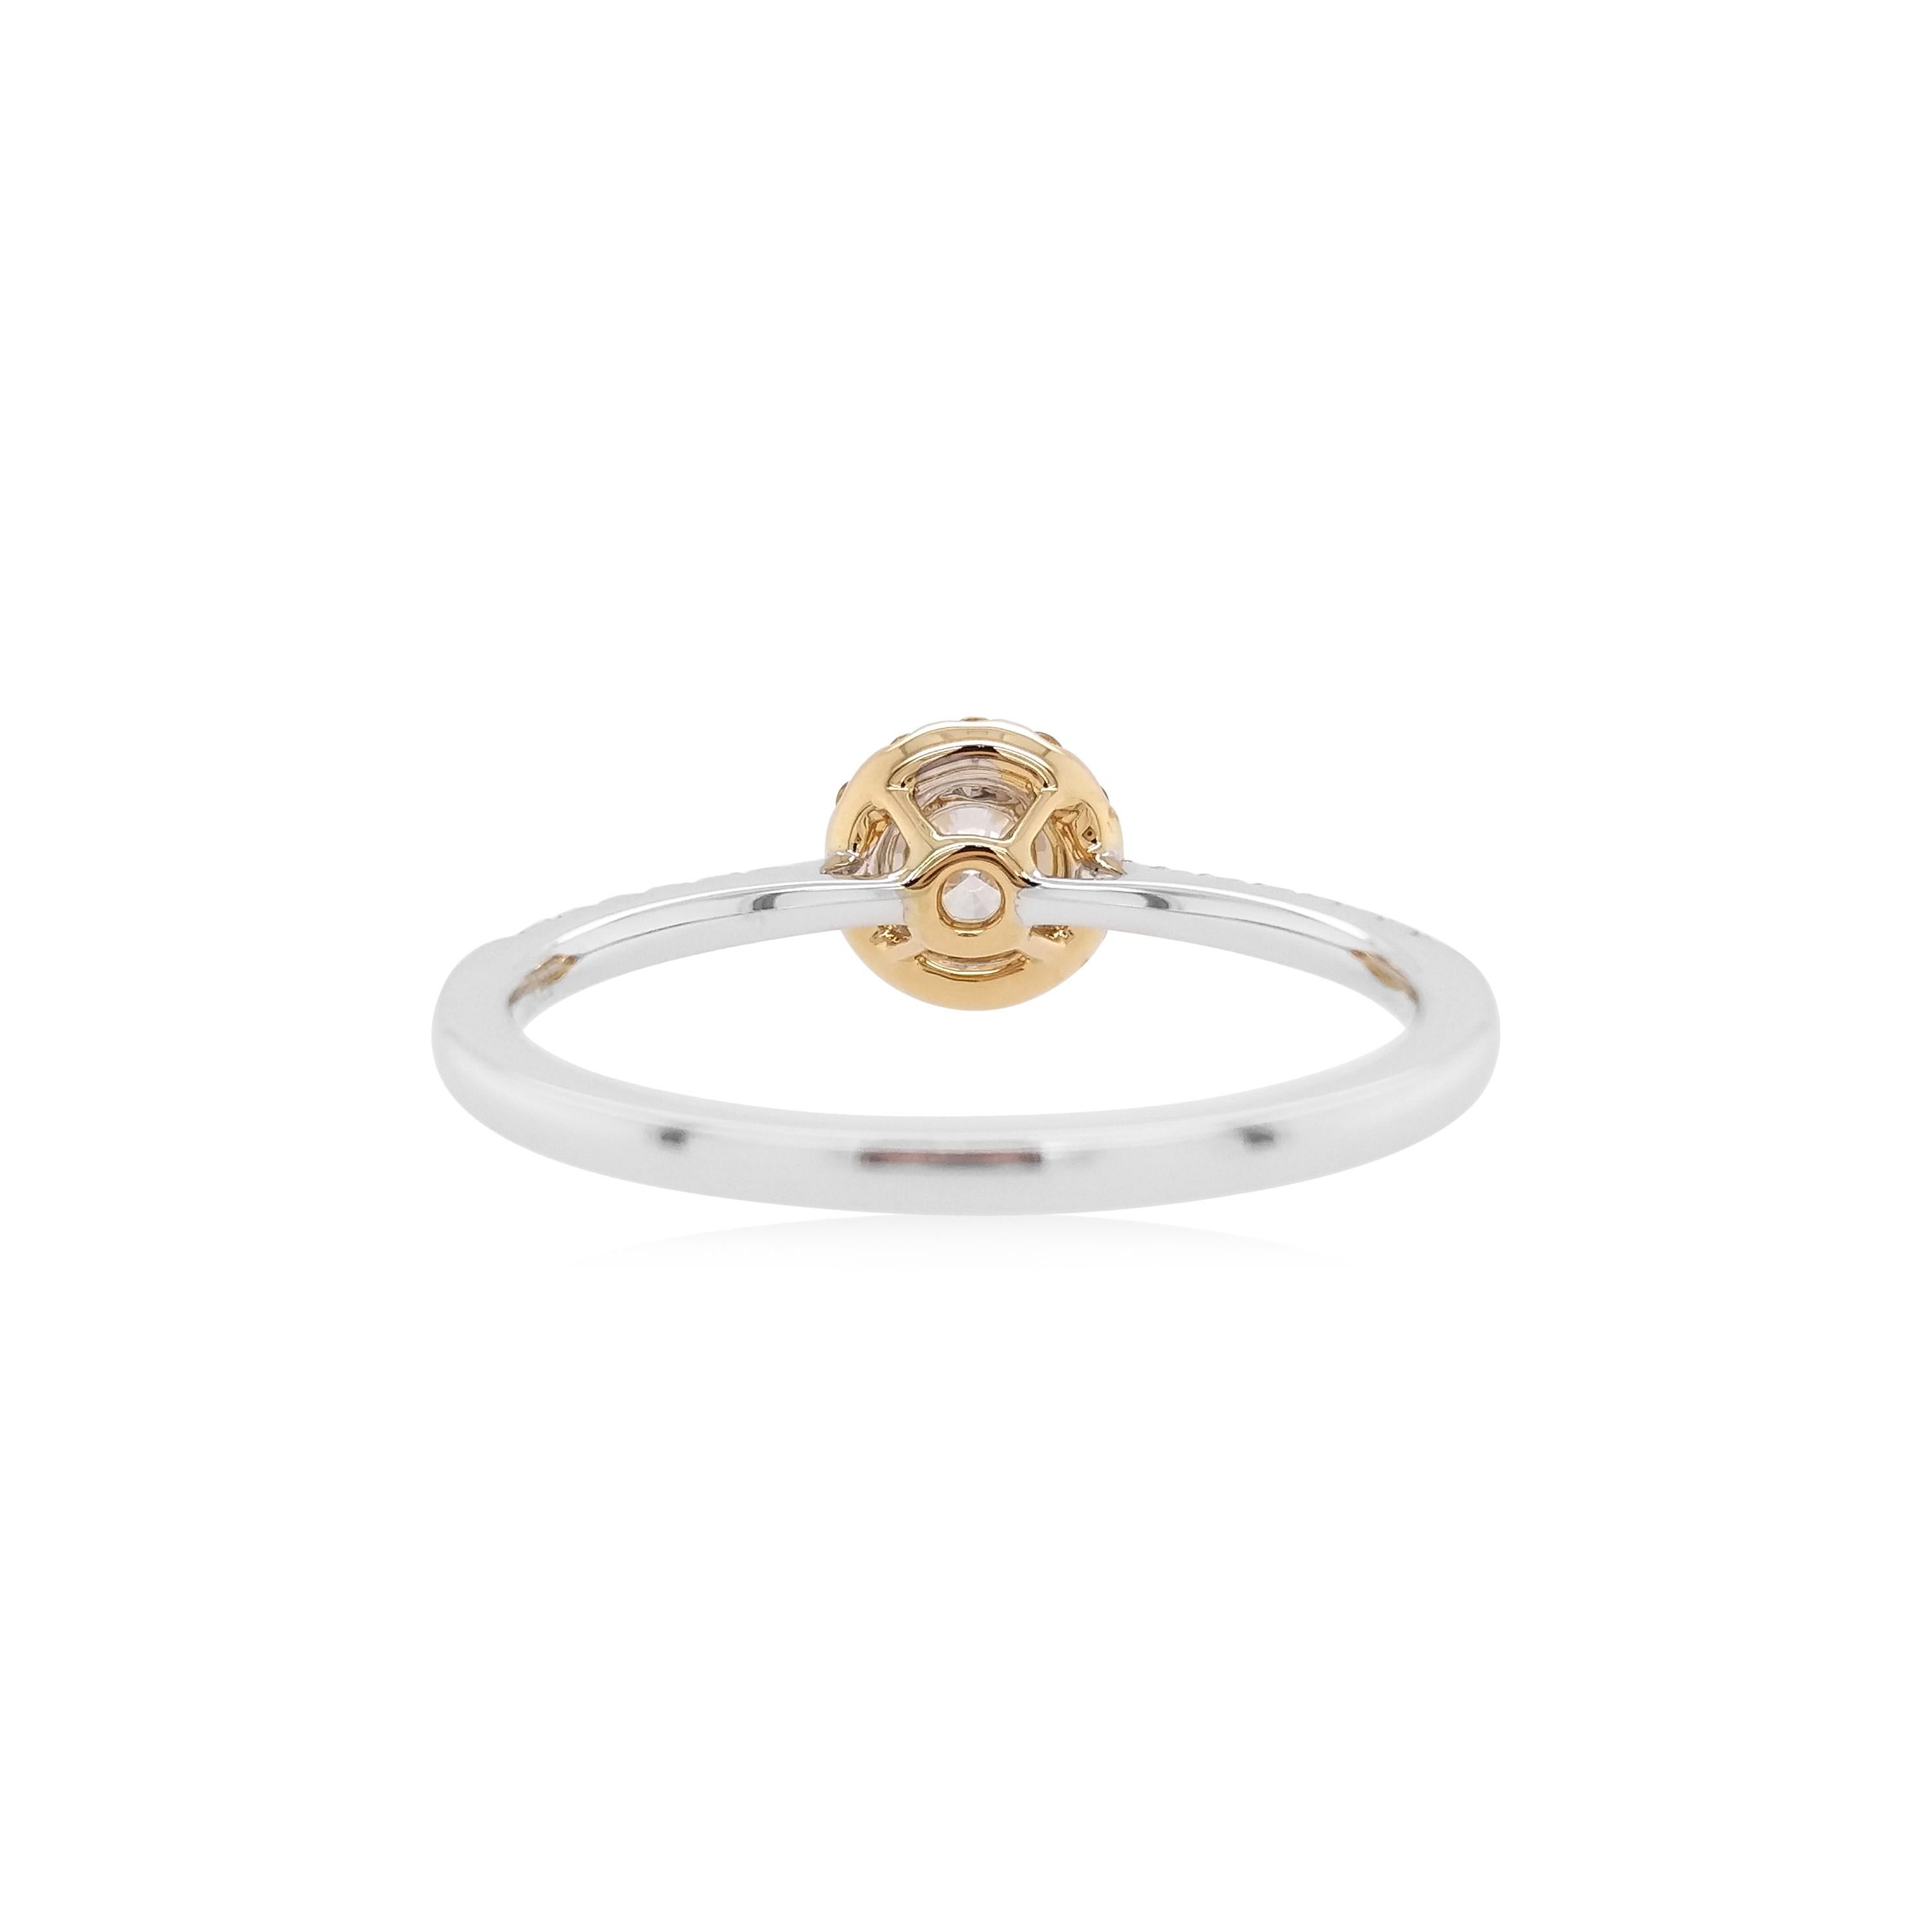 This beautiful ring features an exceptional white diamond as its focal point, which has been hand-selected by our experts. Surrounded by a halo of orange diamonds and encased in a bold 18 Karat white and yellow gold setting, the ring has been